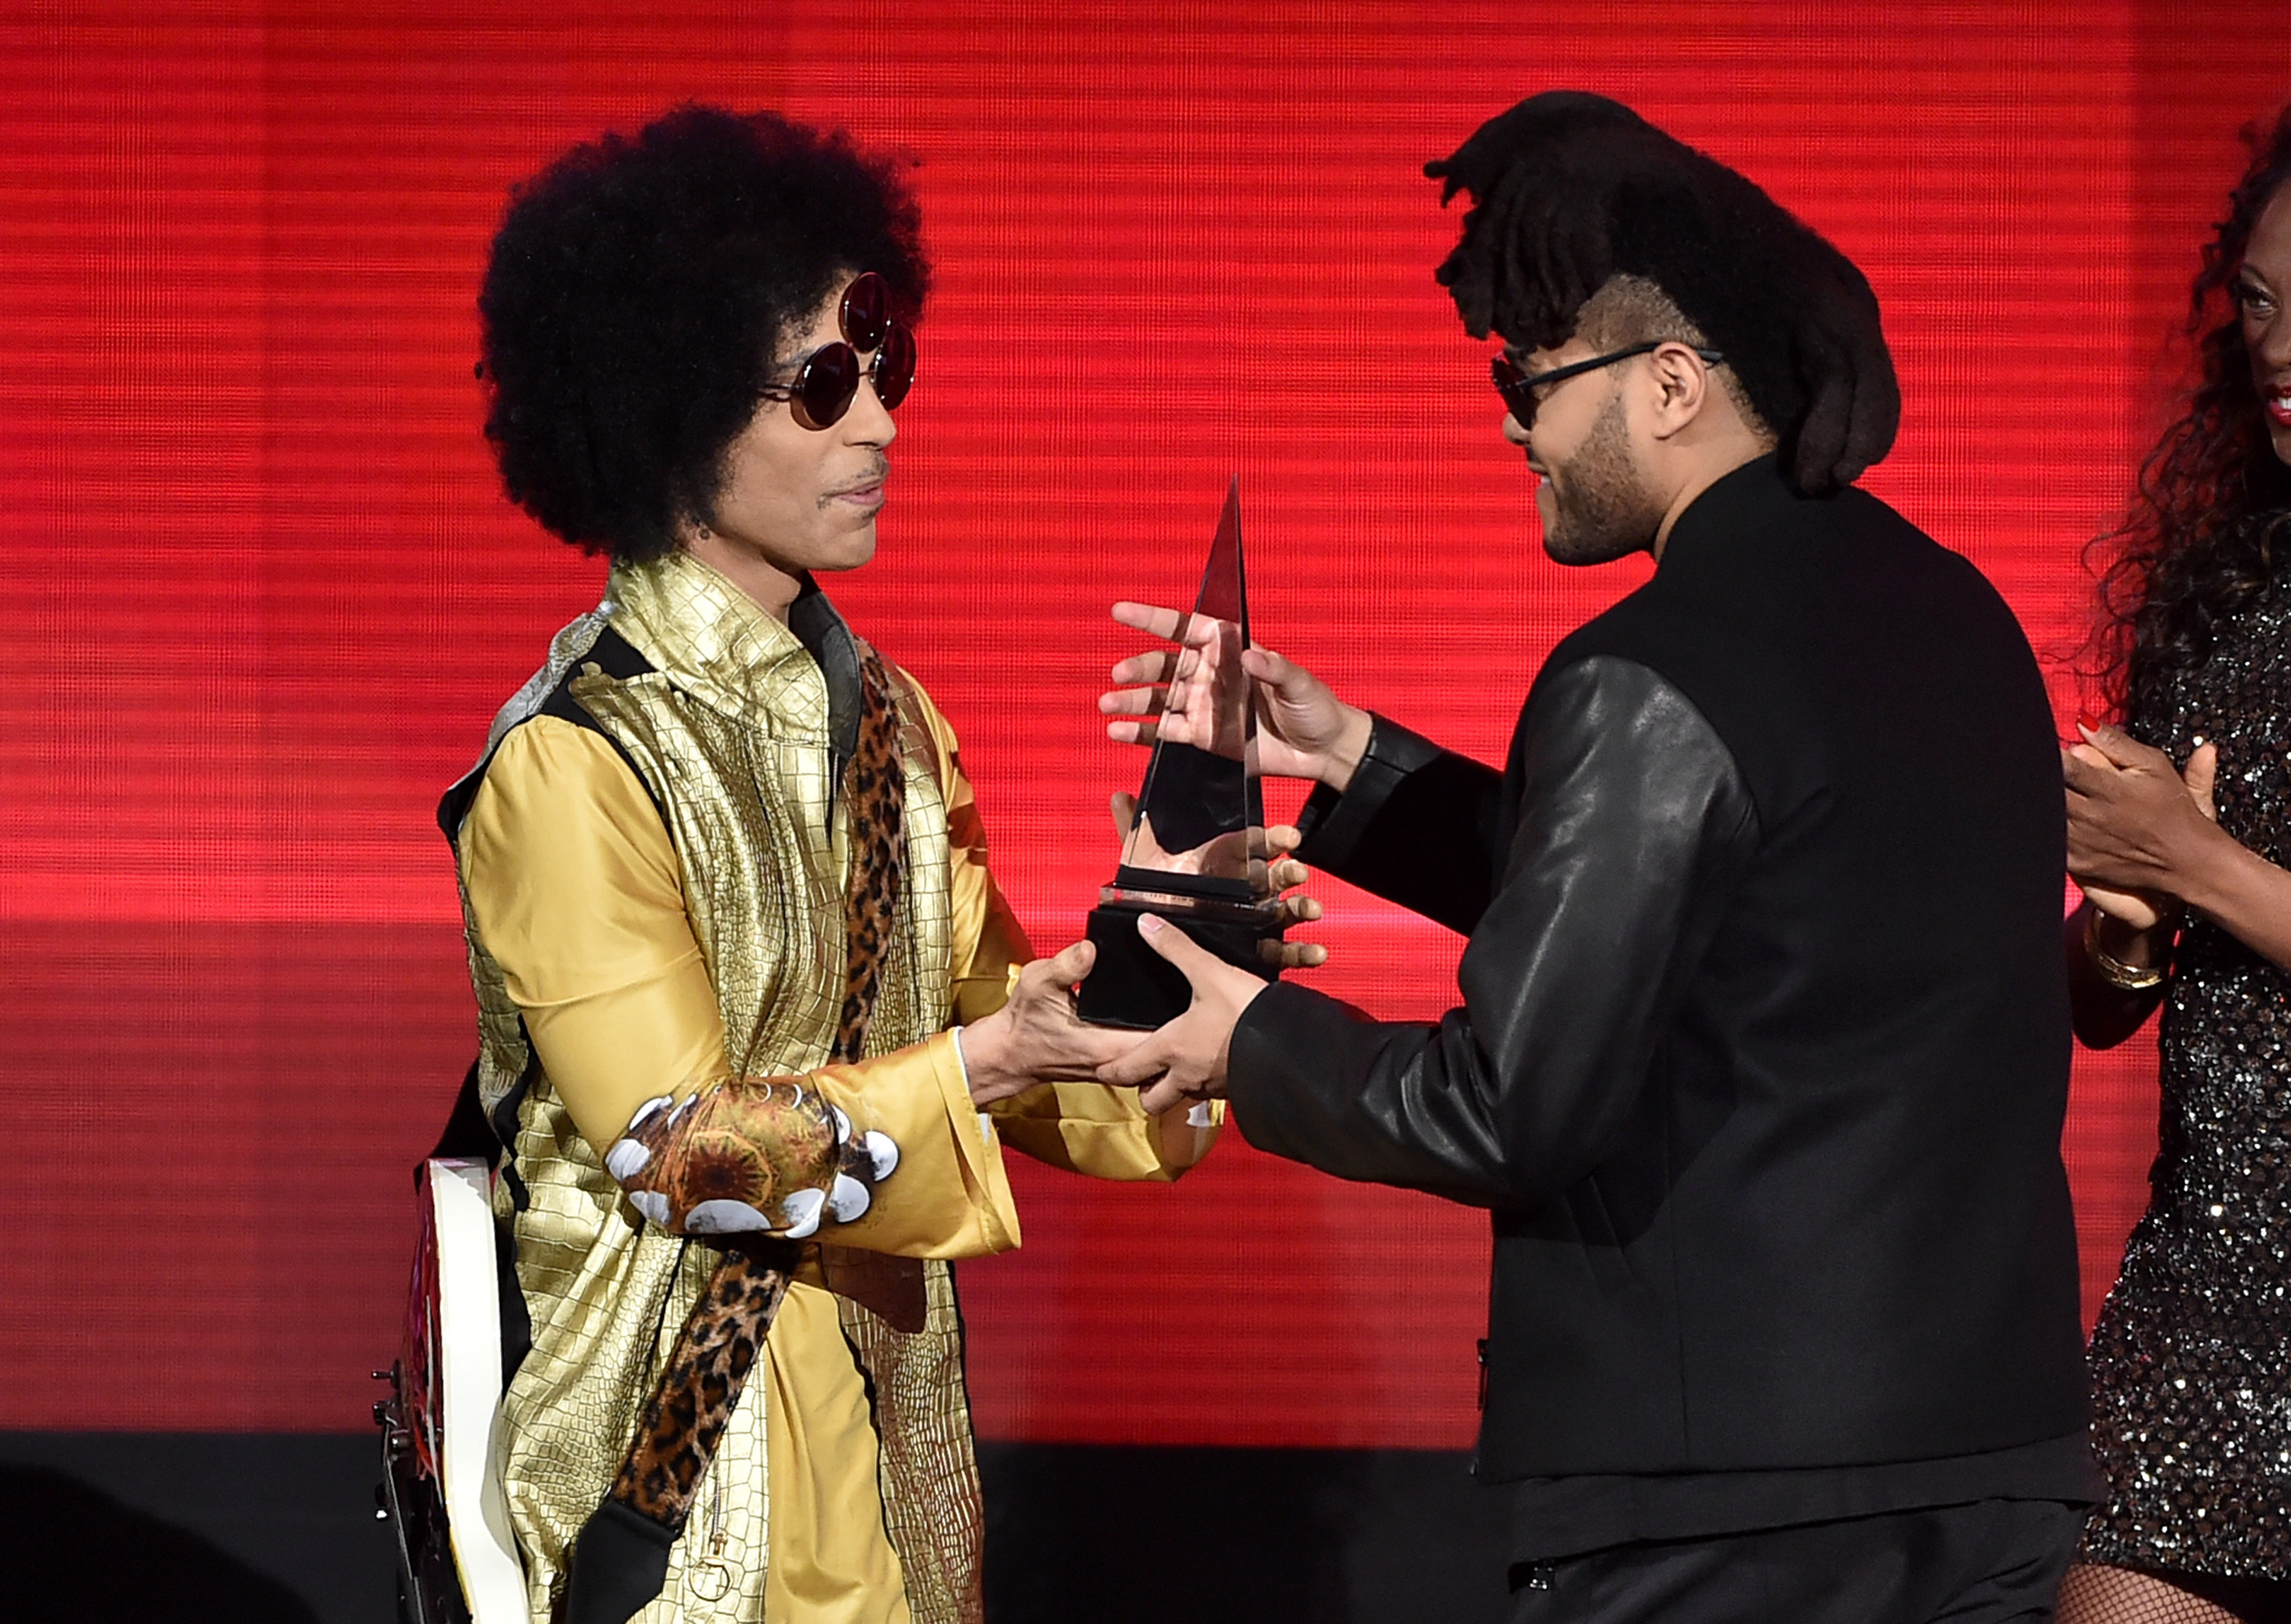 See all the American Music Awards winners